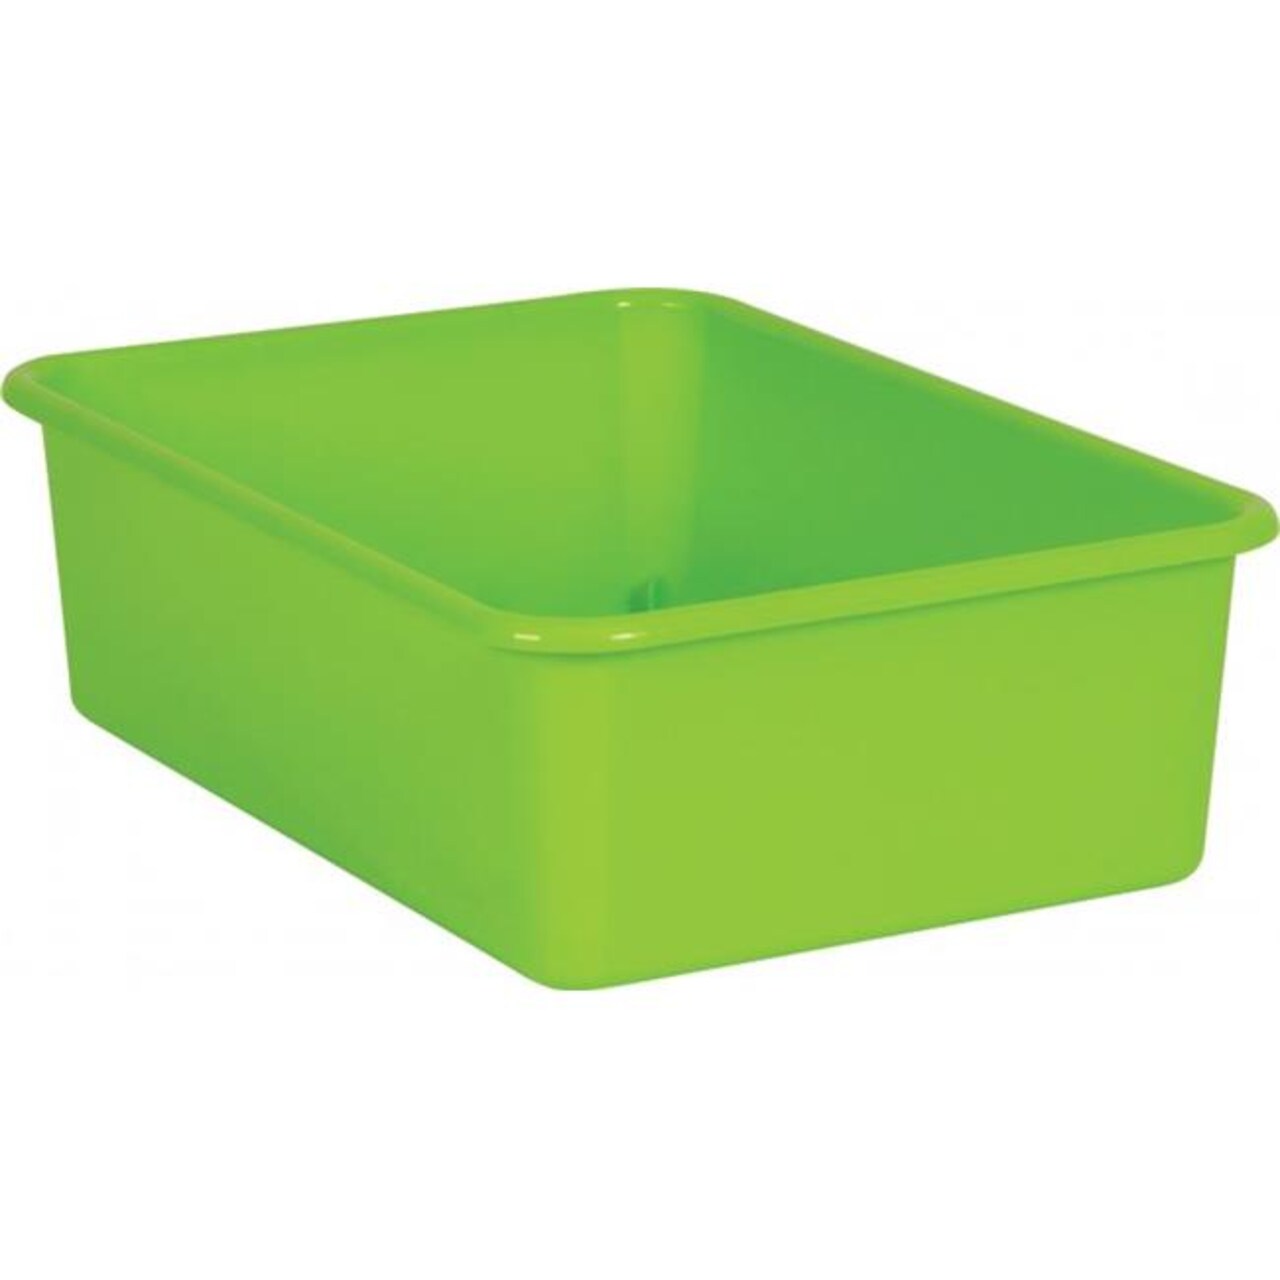 Teacher Created Resources TCR20409 Plastic Storage Bin, Lime - Large